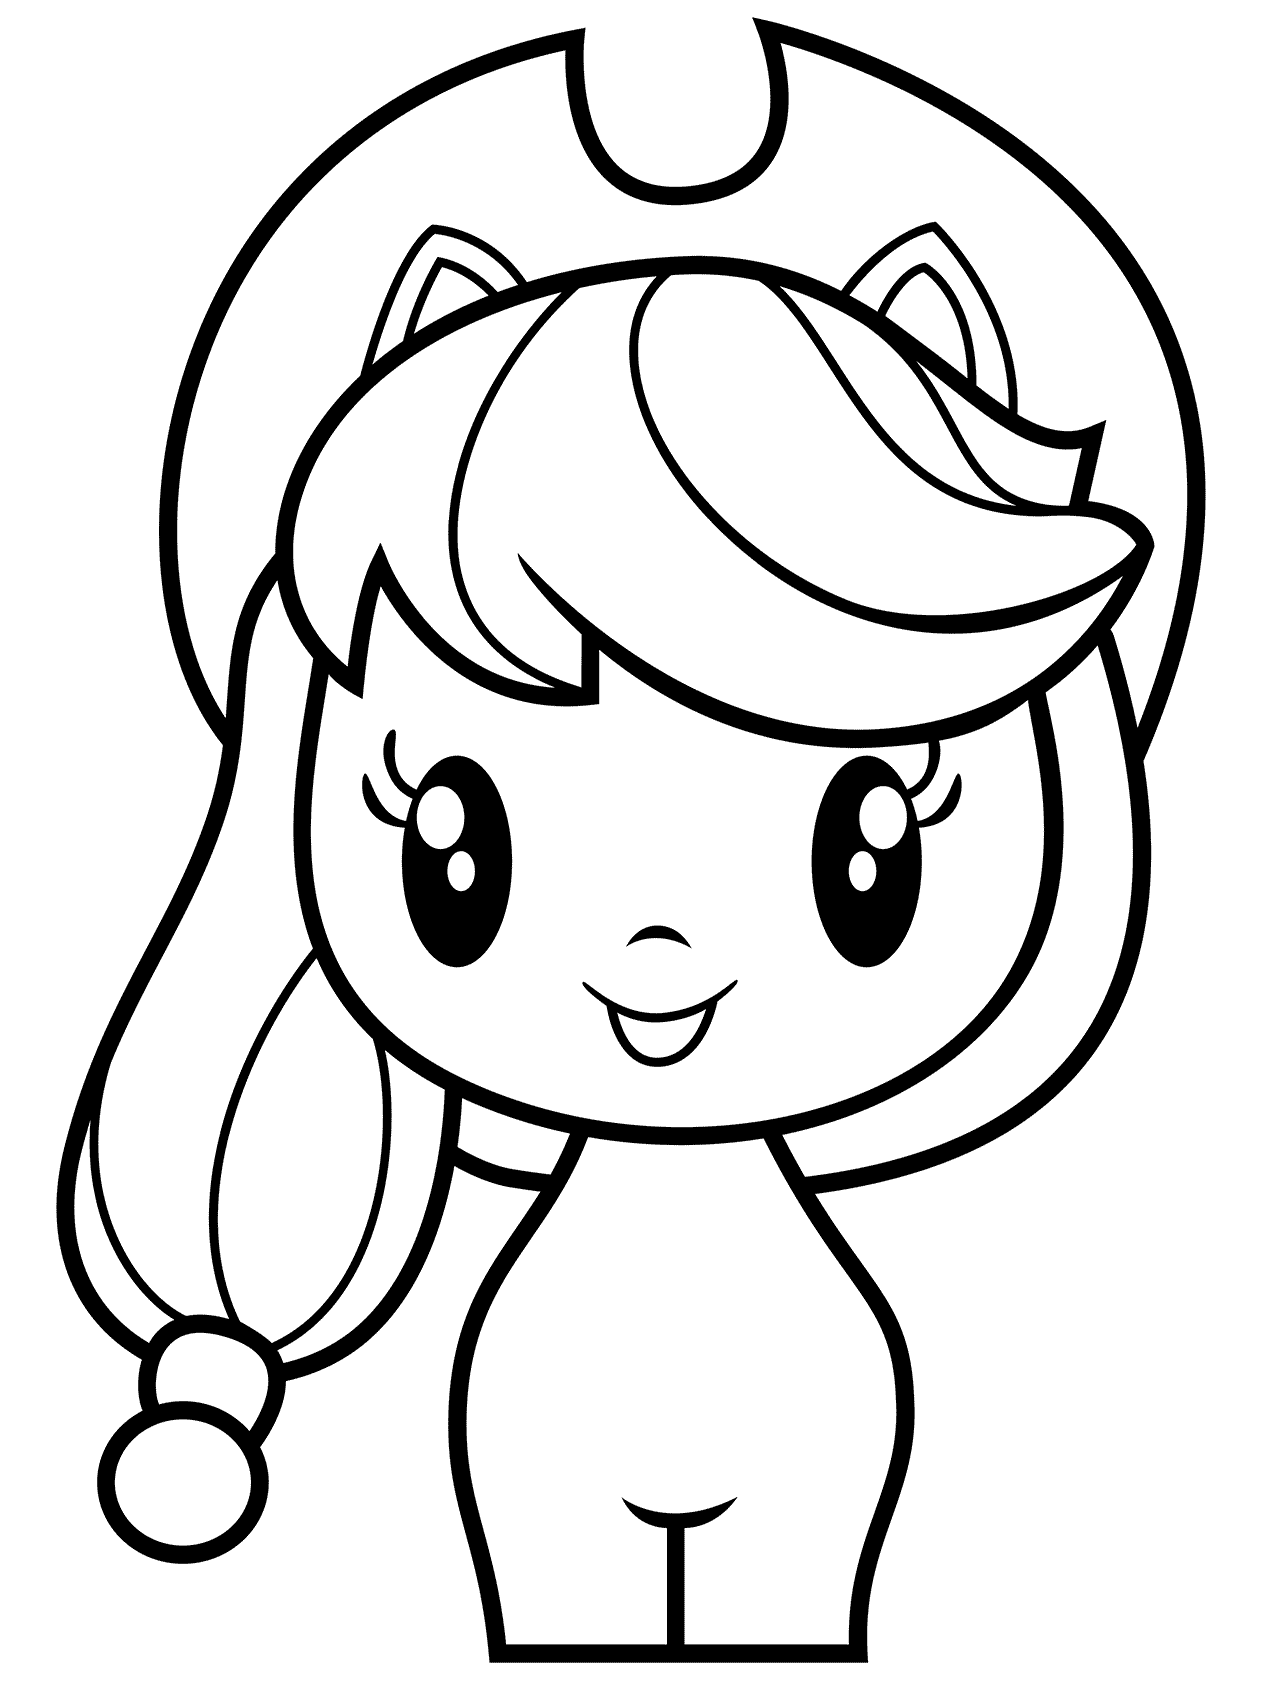 Cutie mark crew coloring pages printable for free download